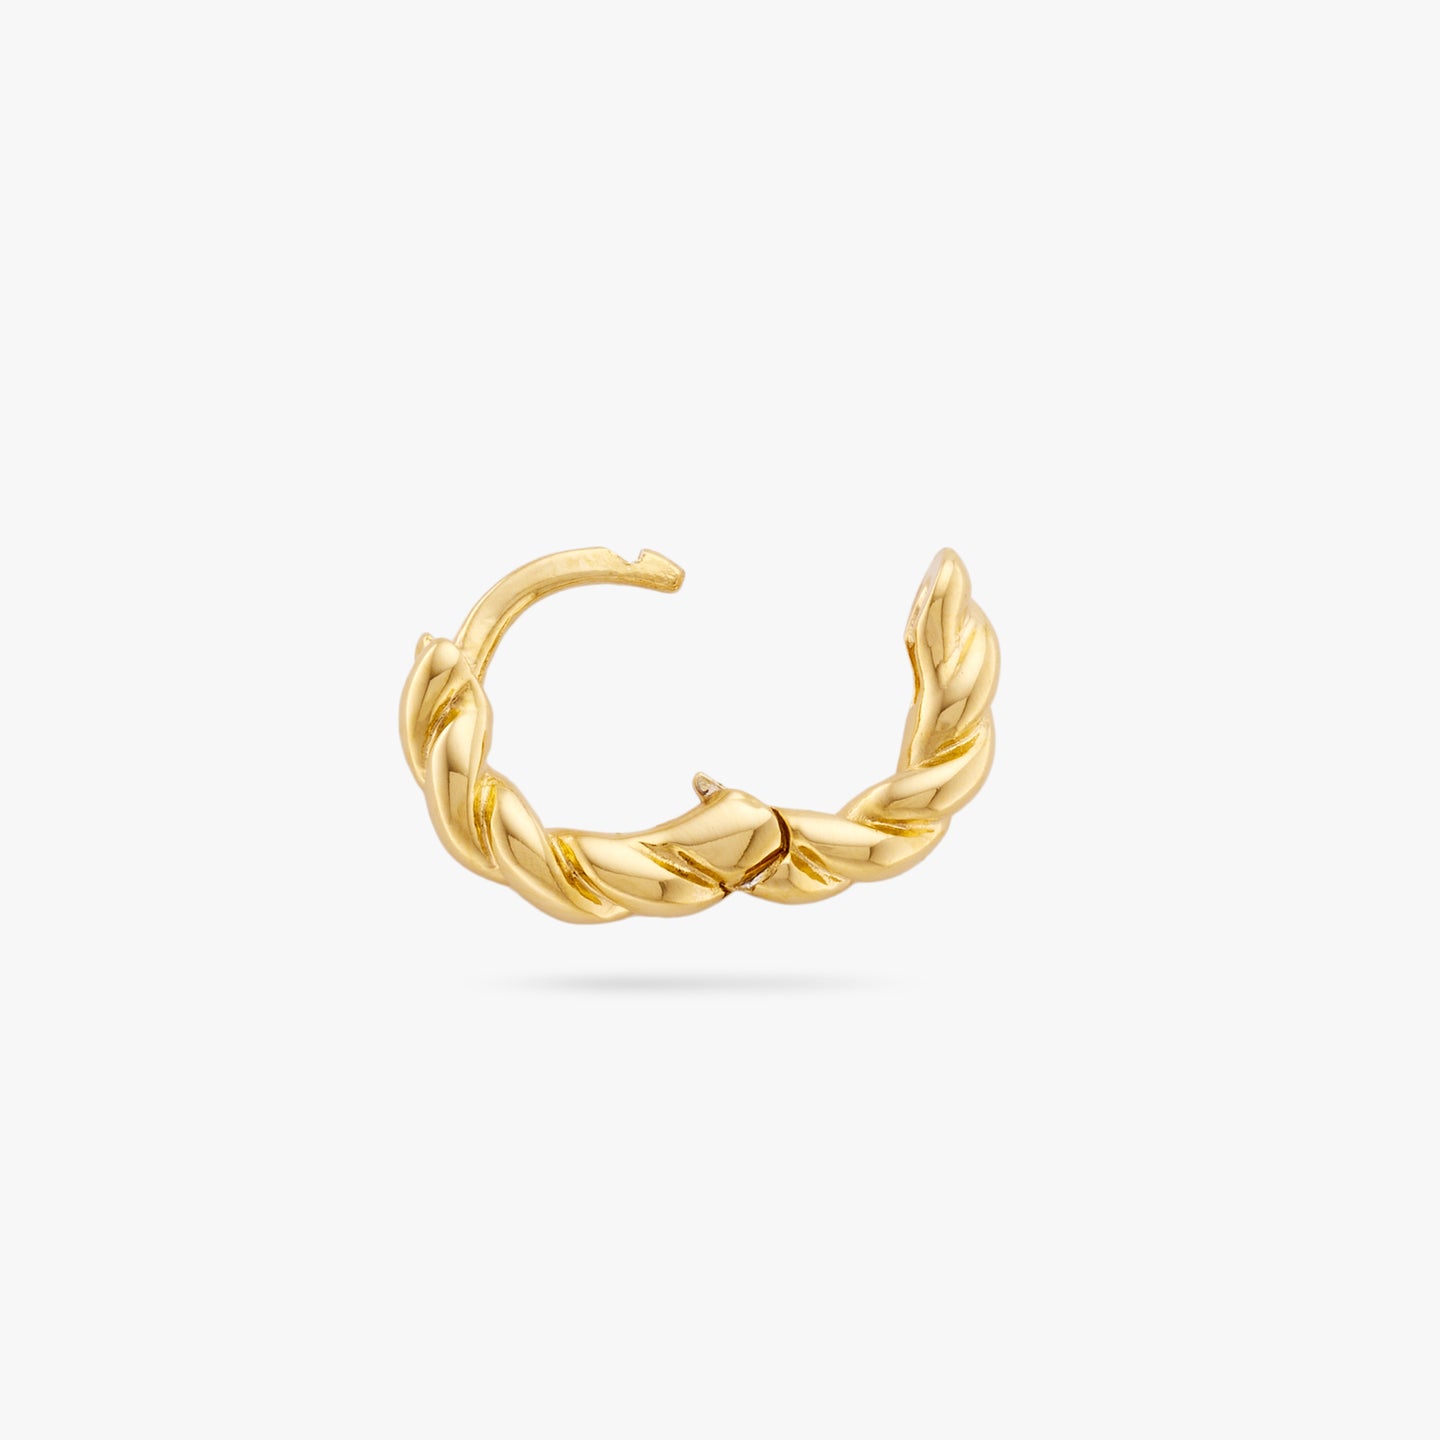 This is a small gold huggie with a twisted detail that has an open clasp color:null|gold